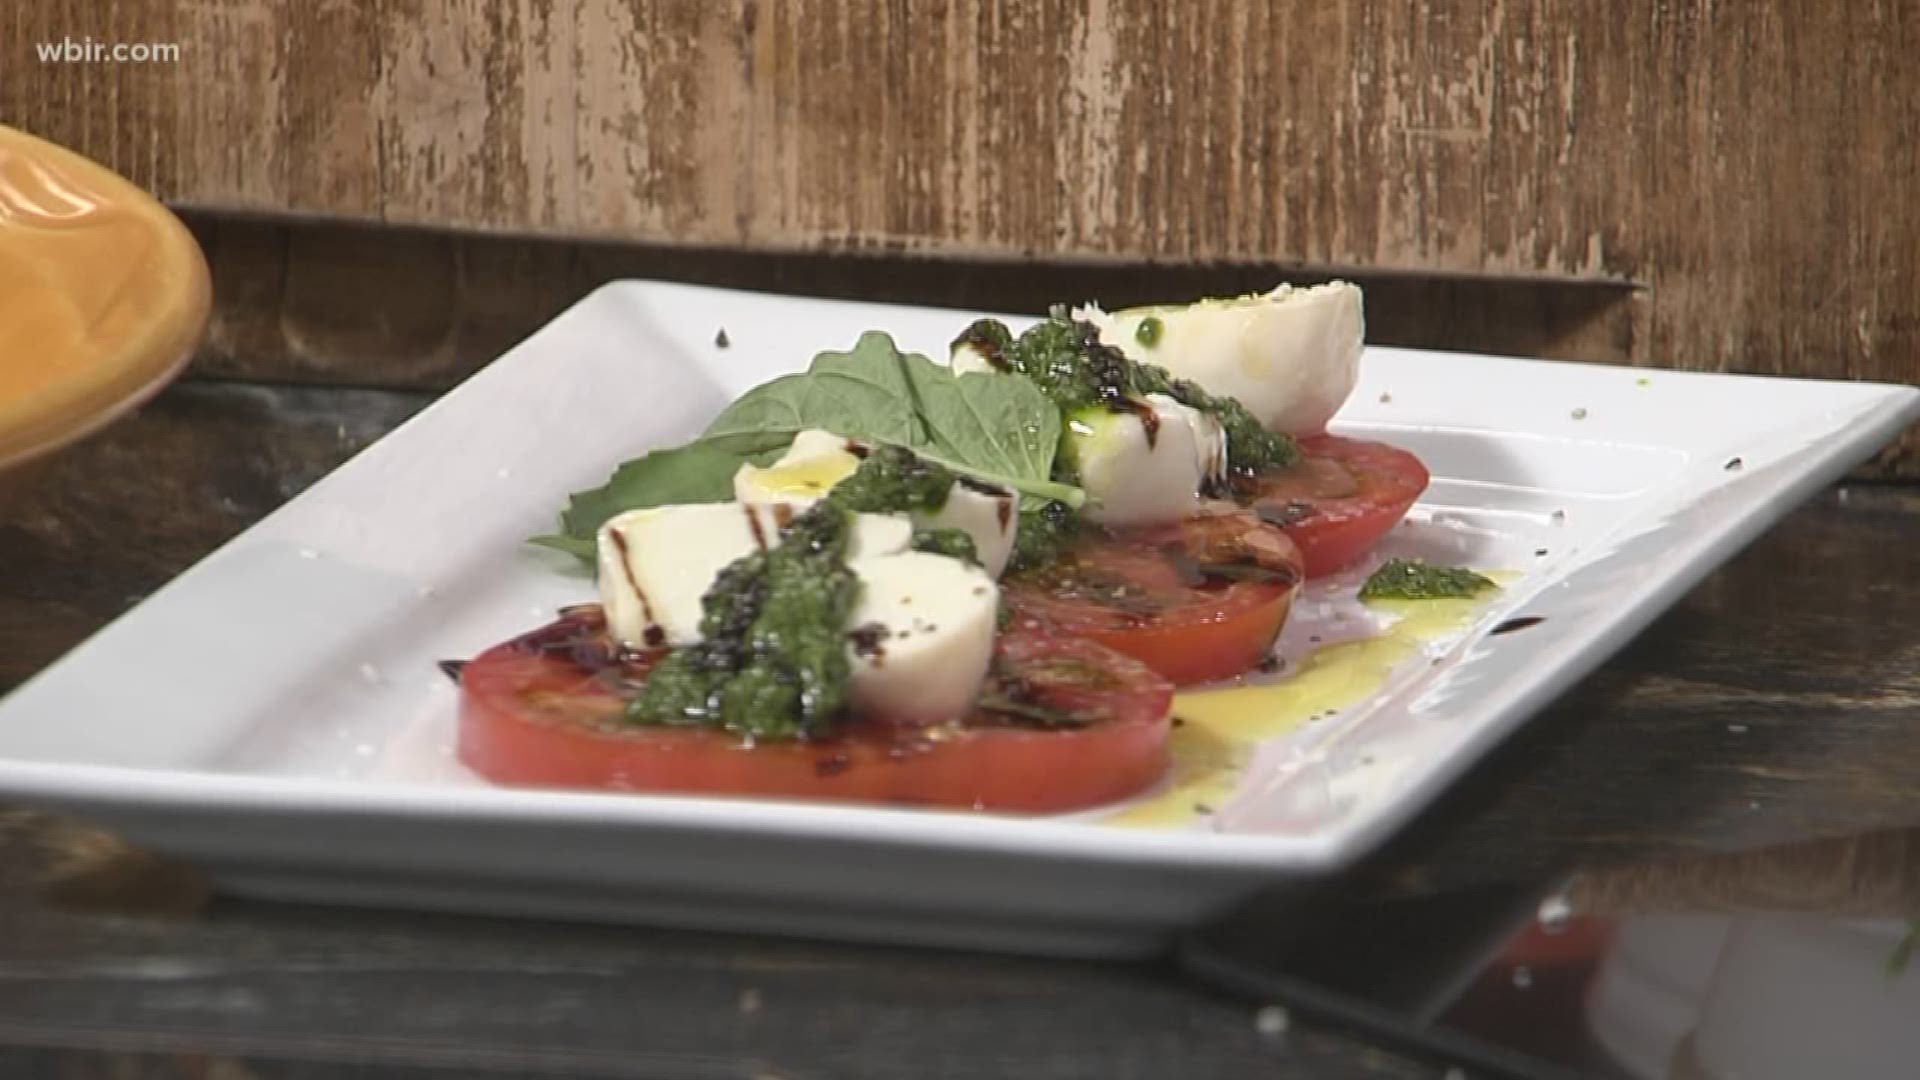 Chef Frank from Cappuccino's Italian Restaurant in Knoxville shows us how to use fresh, local tomatoes in fresh summer salads.